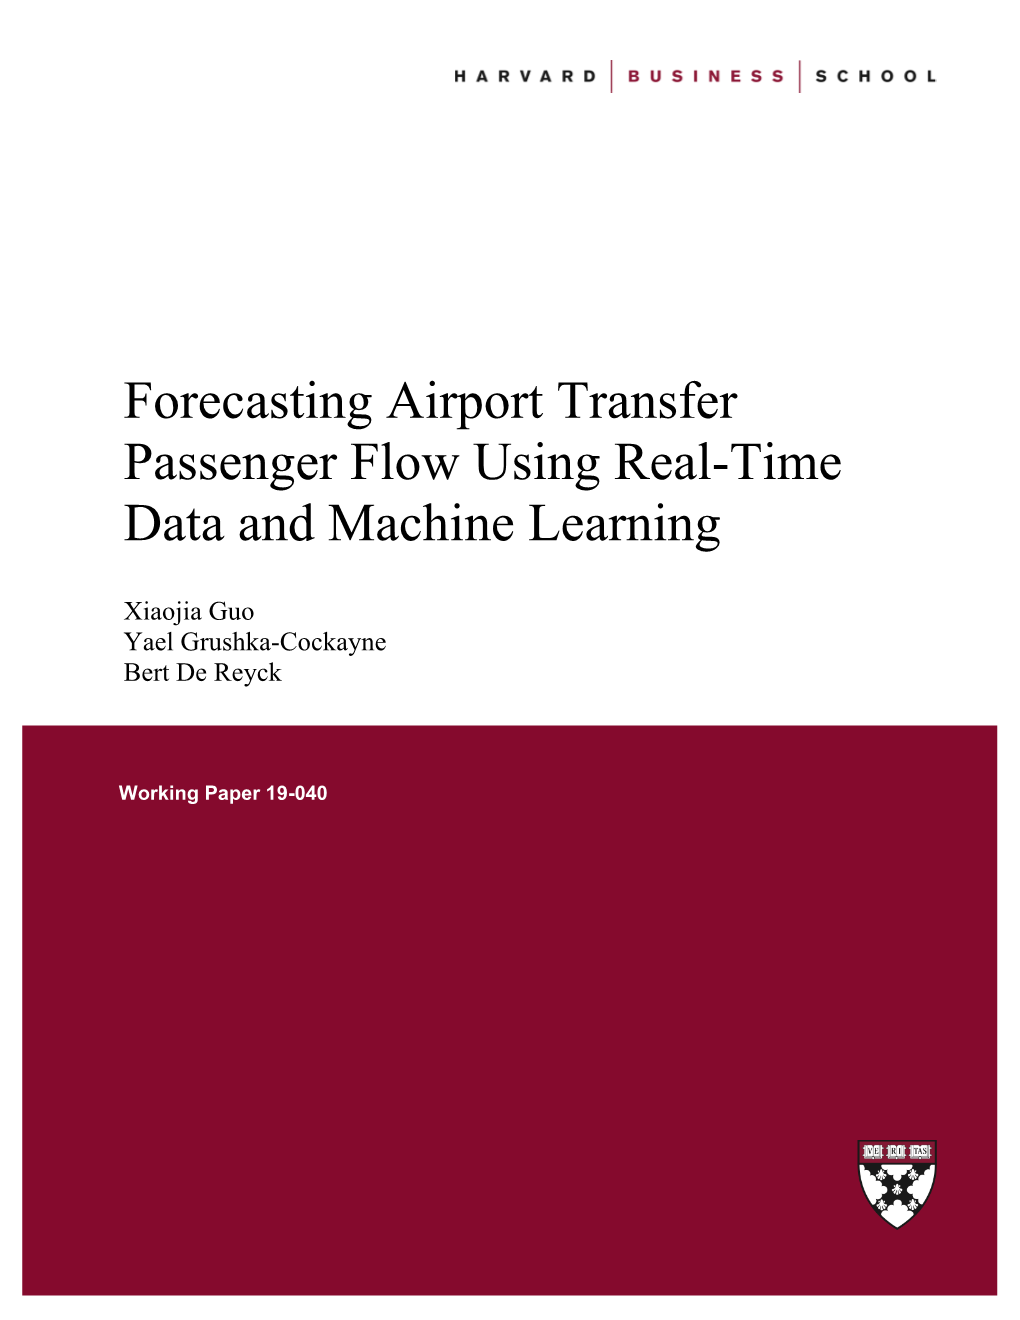 Forecasting Airport Transfer Passenger Flow Using Real-Time Data and Machine Learning